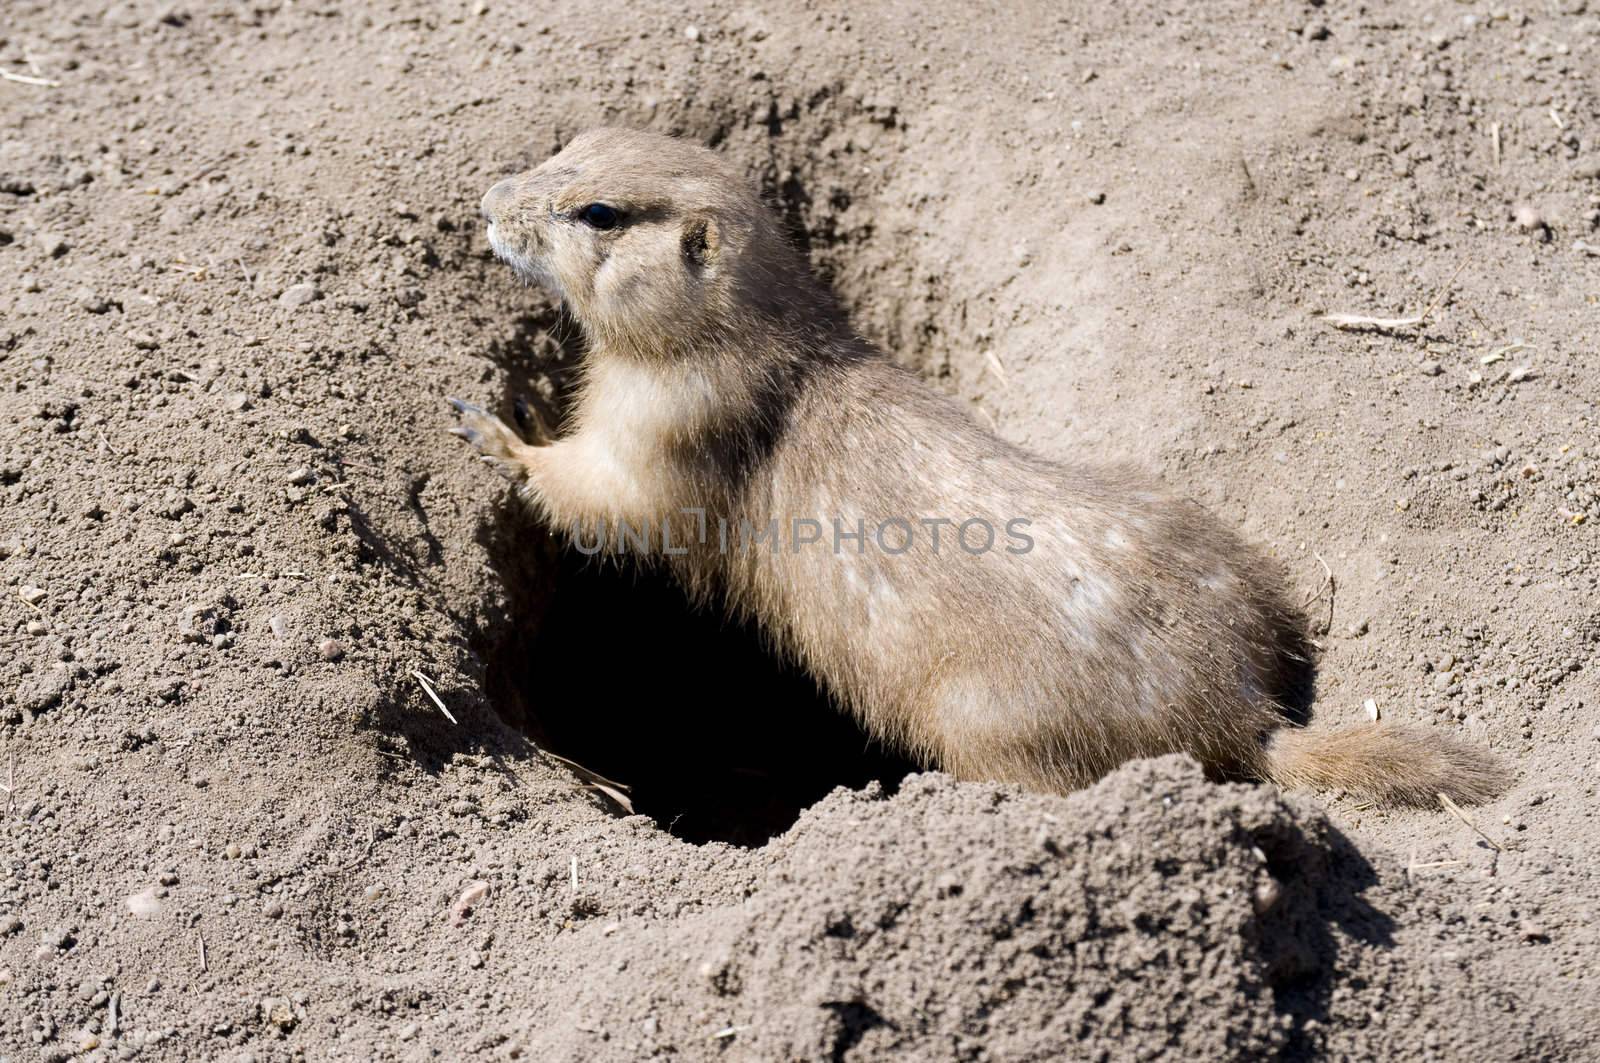 prarie dog by PDImages